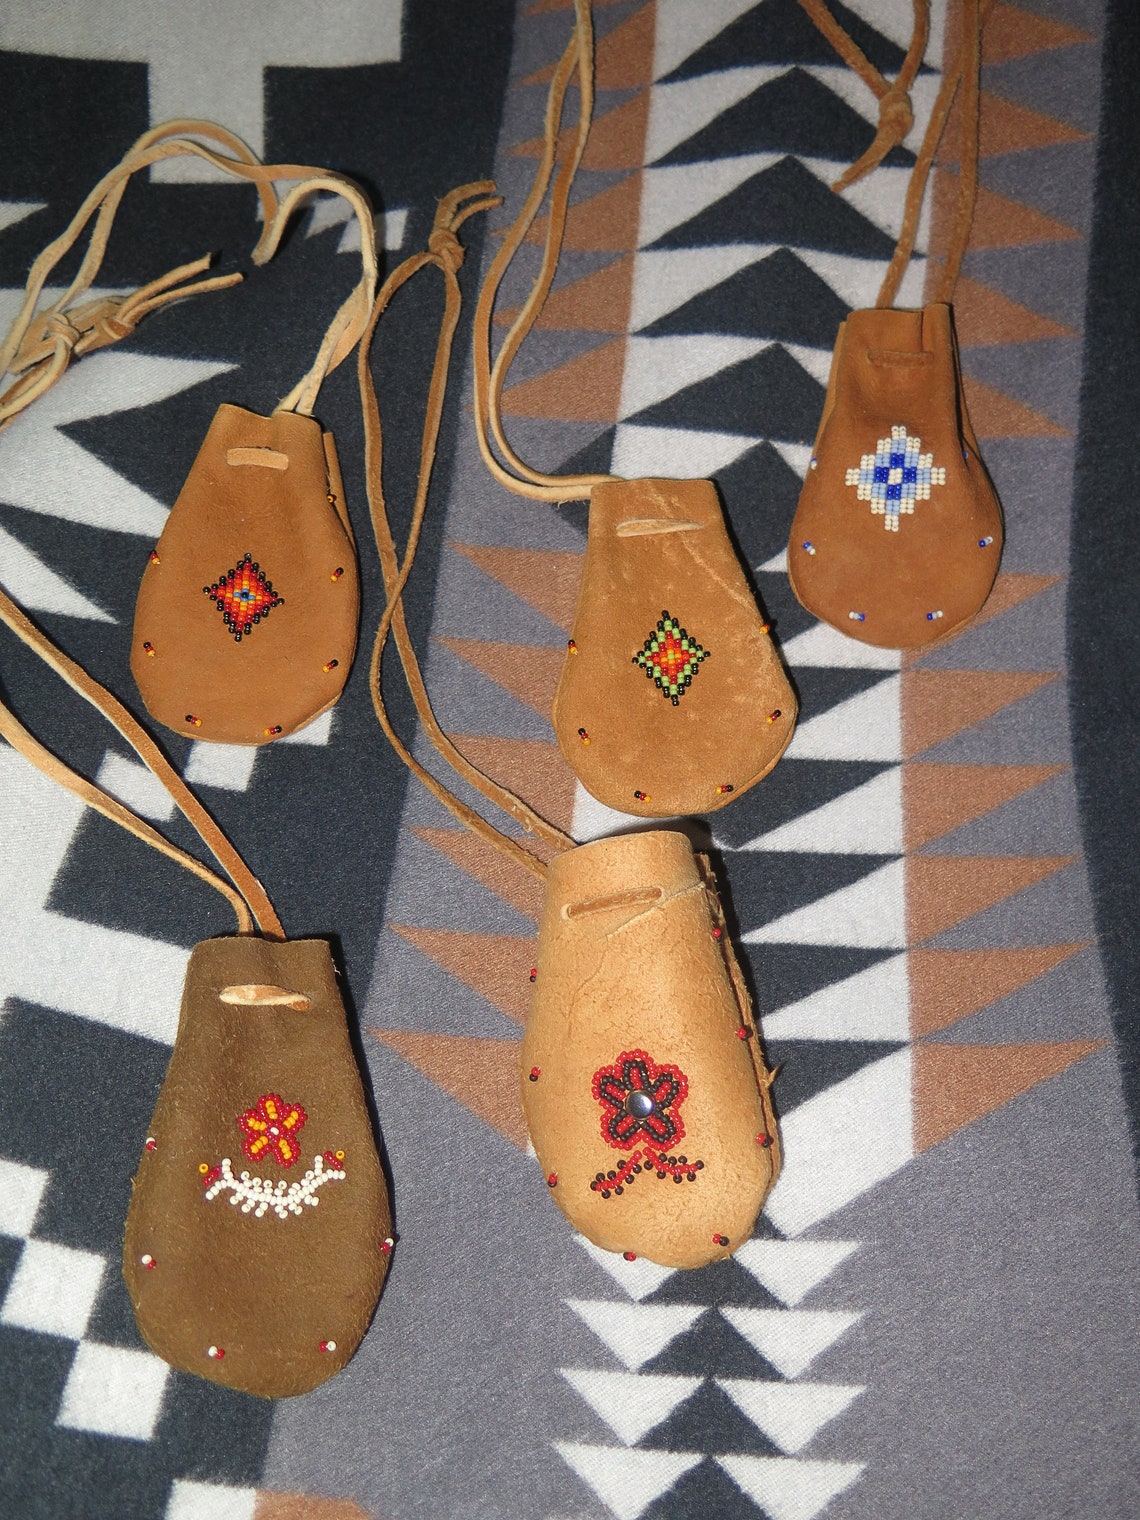 Native American Smoked Brain Tanned Leather Deer Beaded | Etsy